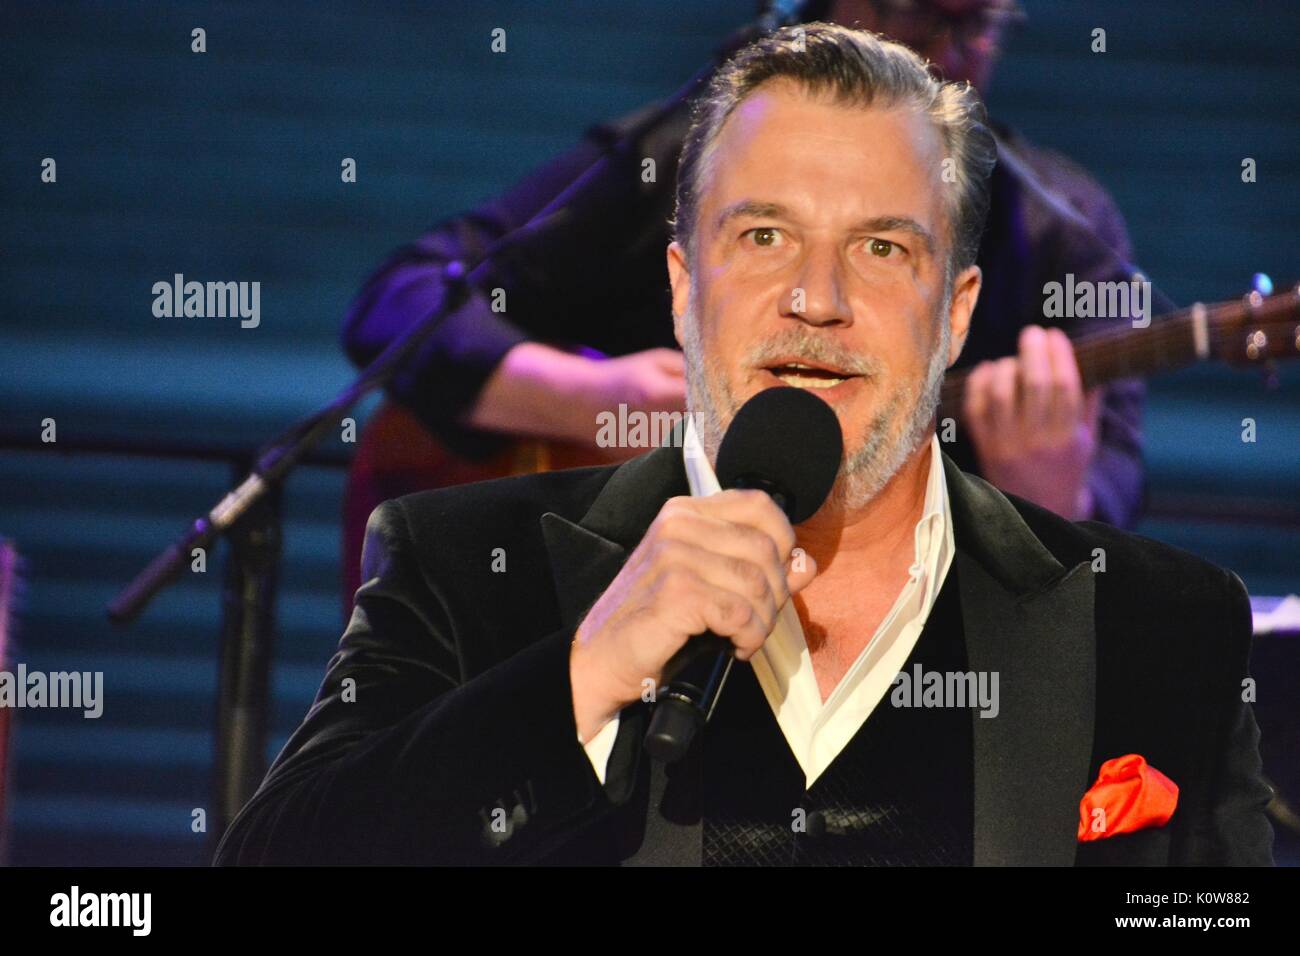 Ötigheim, Germany, 24th August, 2017, Open Air '20 Jahre Marshall & Alexander' Featuring Marc Marshall and Jay Alexander Credit: mediensegel/Alamy Live News Stock Photo